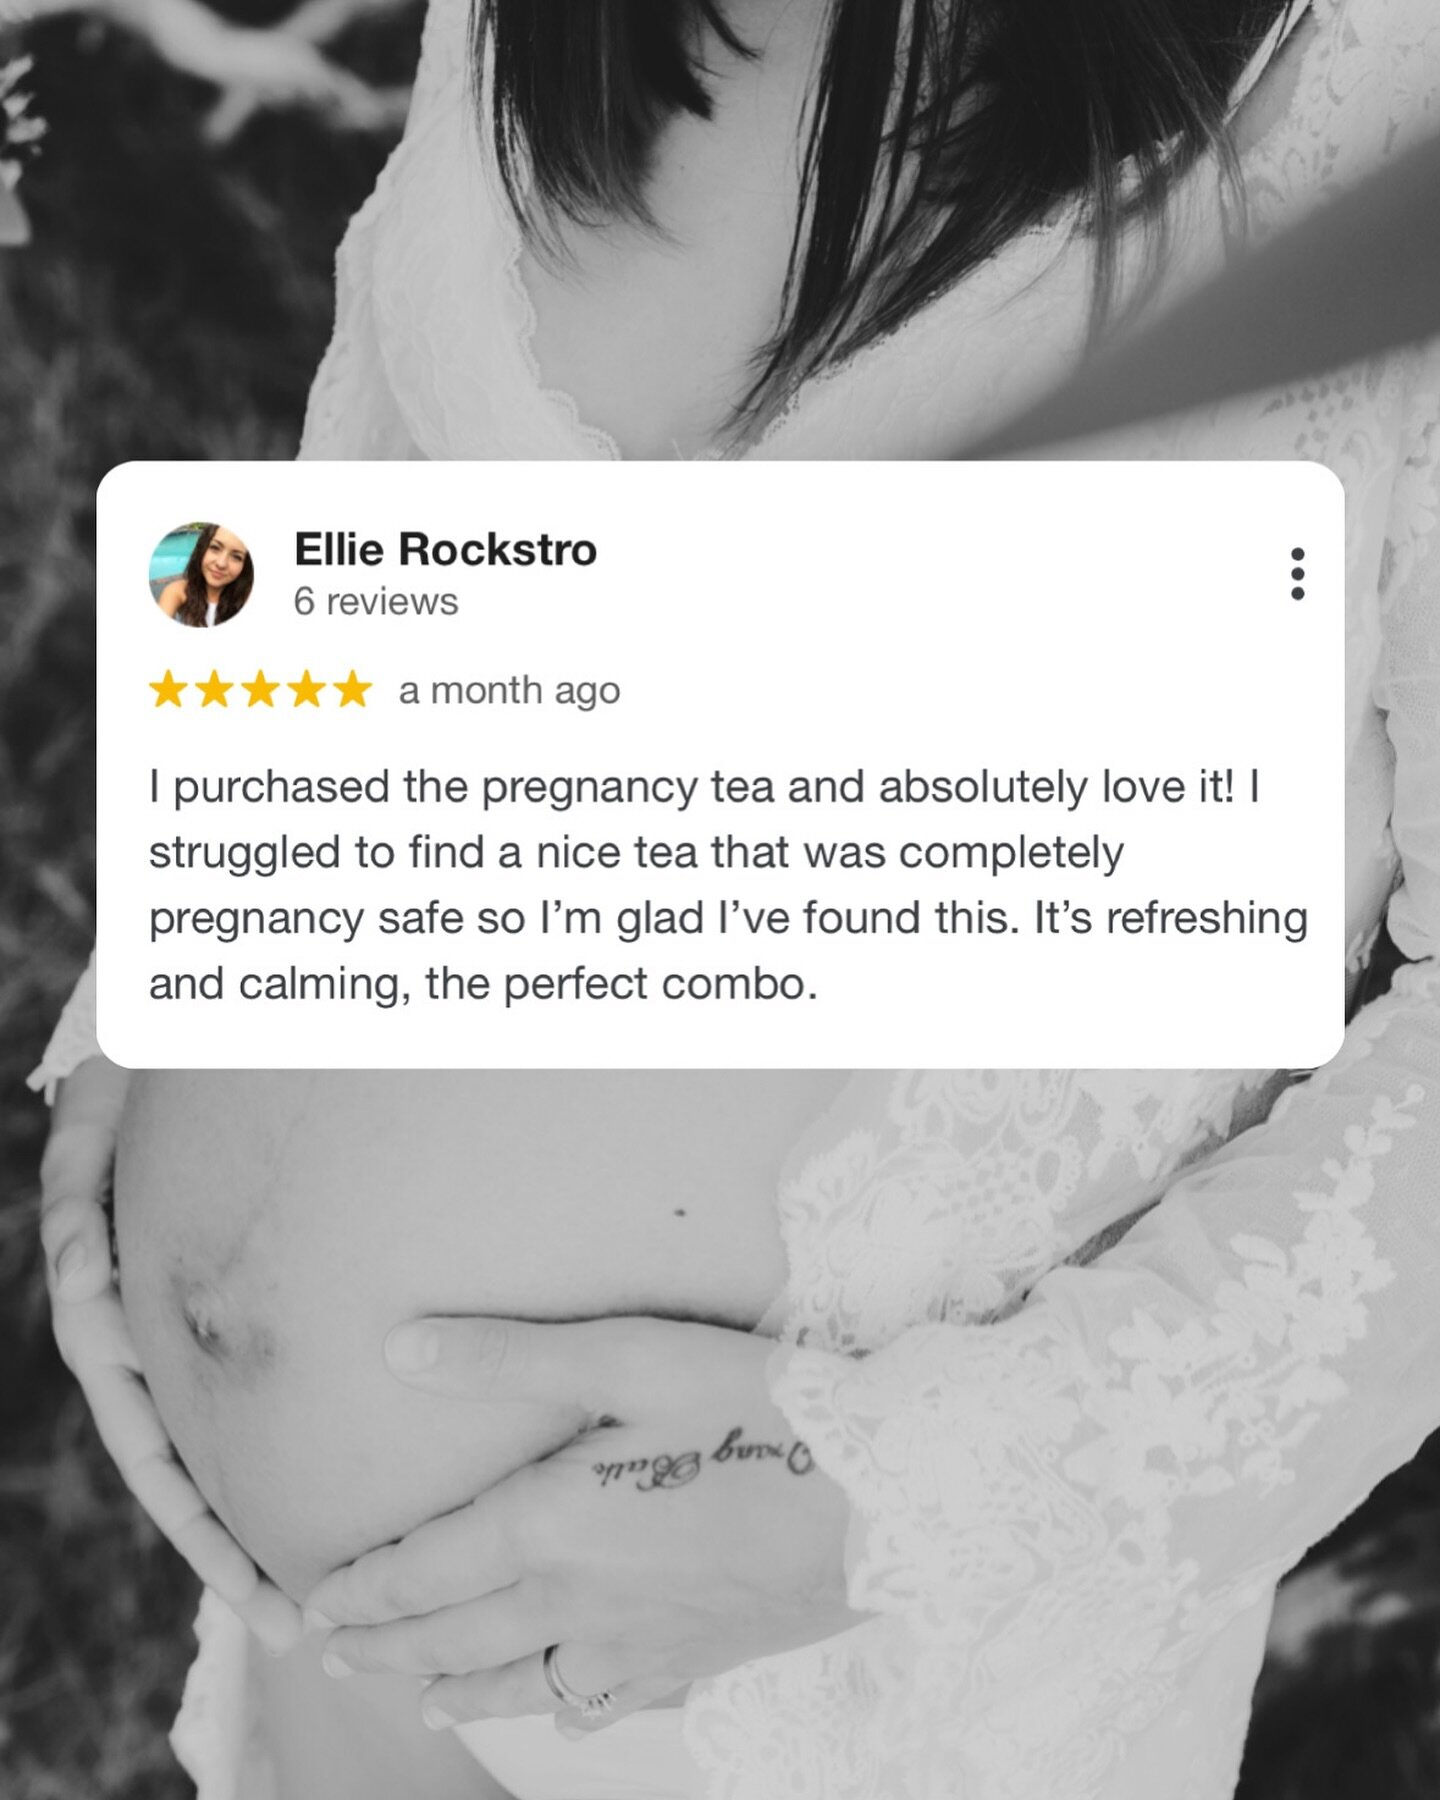 We love receiving feedback from our beautiful customers. Reviews like these fill our hearts ✨ 

#preggo #pregnancysupport #doula #teatime #tealover